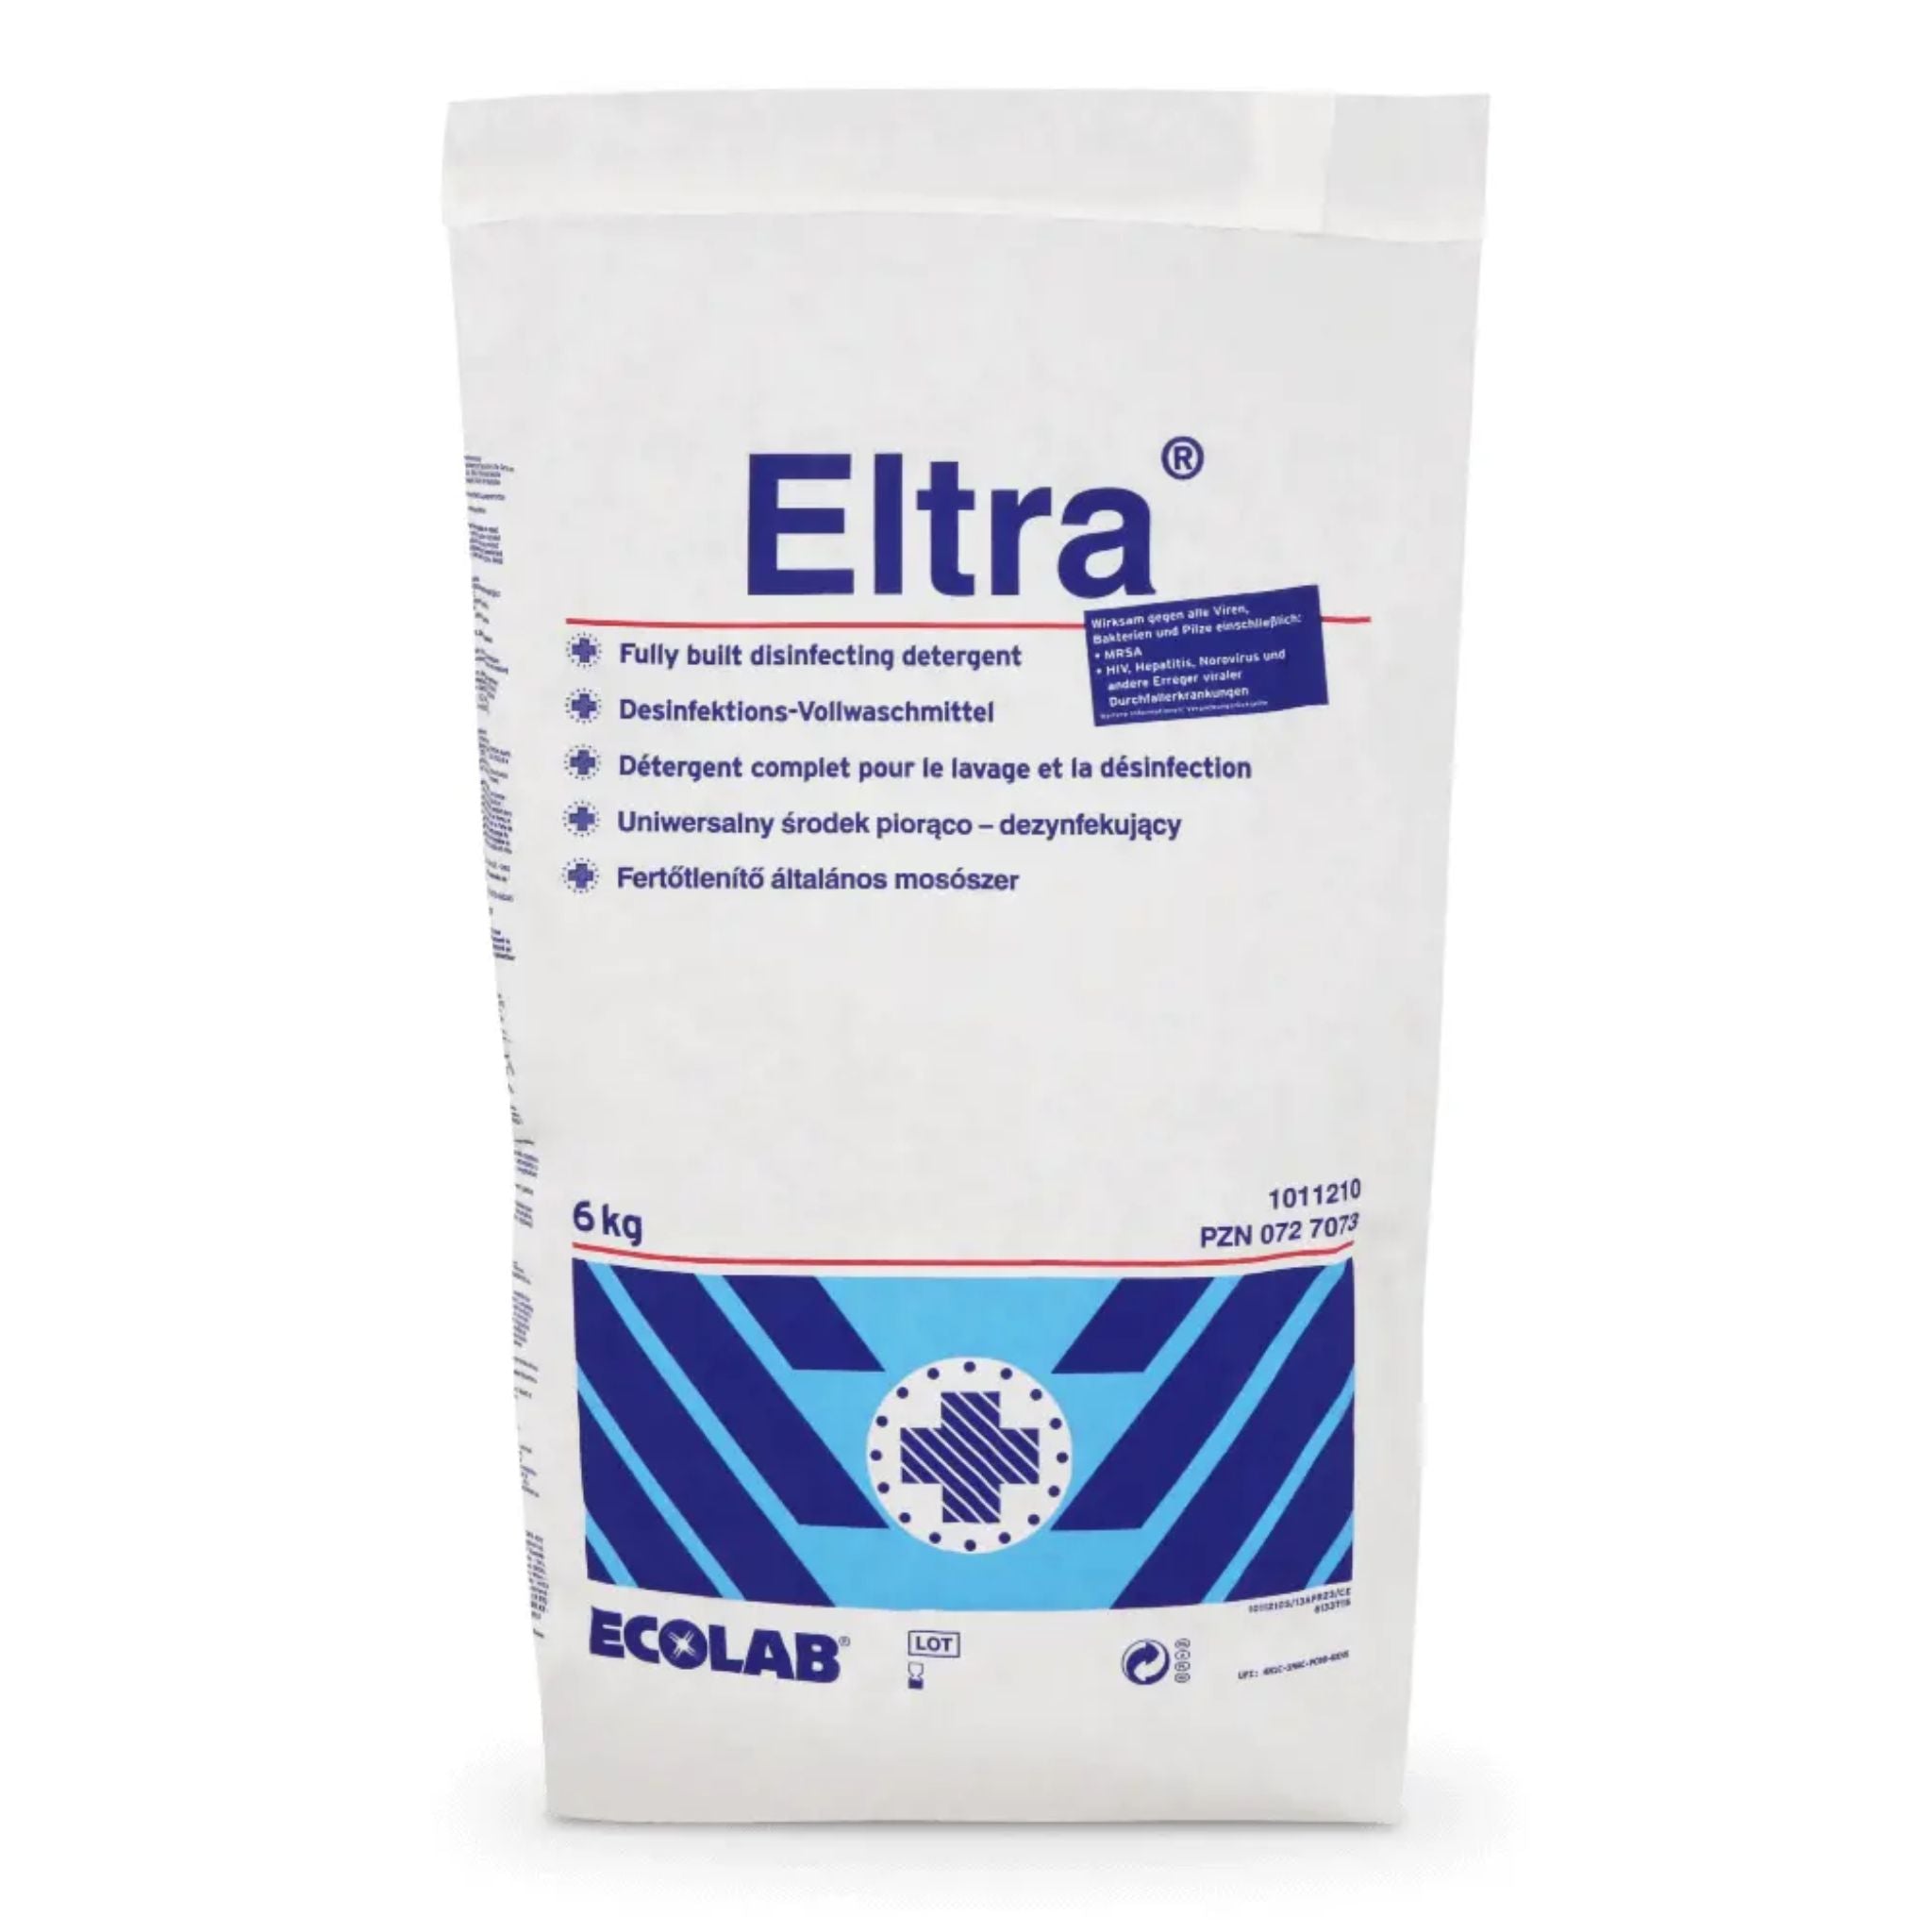 ELTRA® Disinfectant all-purpose washing powder detergent 6 kg package